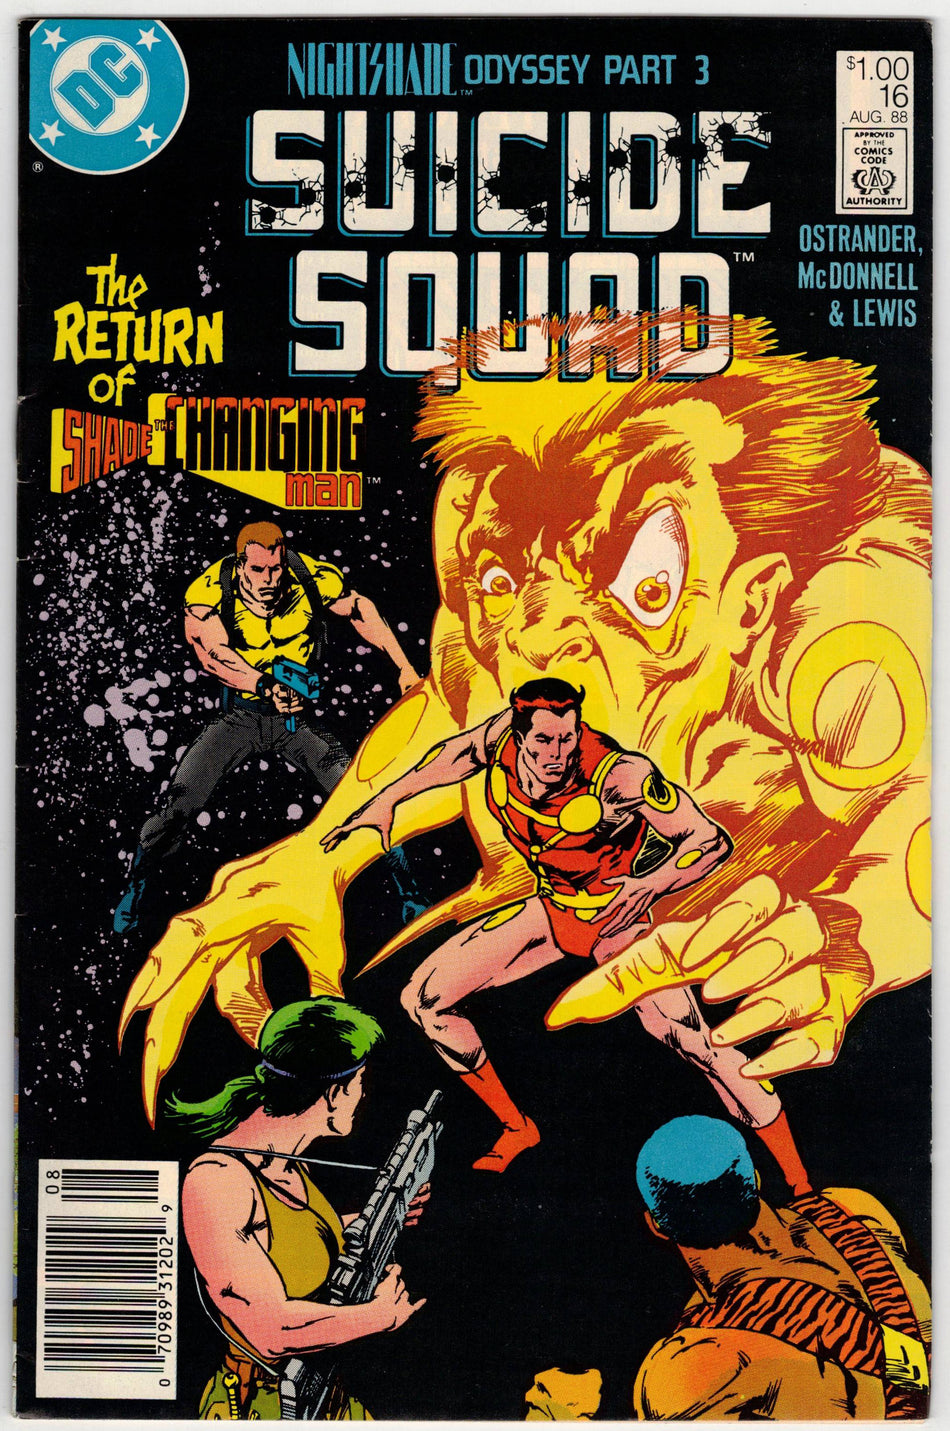 Photo of Suicide Squad, Vol. 1 (1988)  Issue 16  Comic sold by Stronghold Collectibles